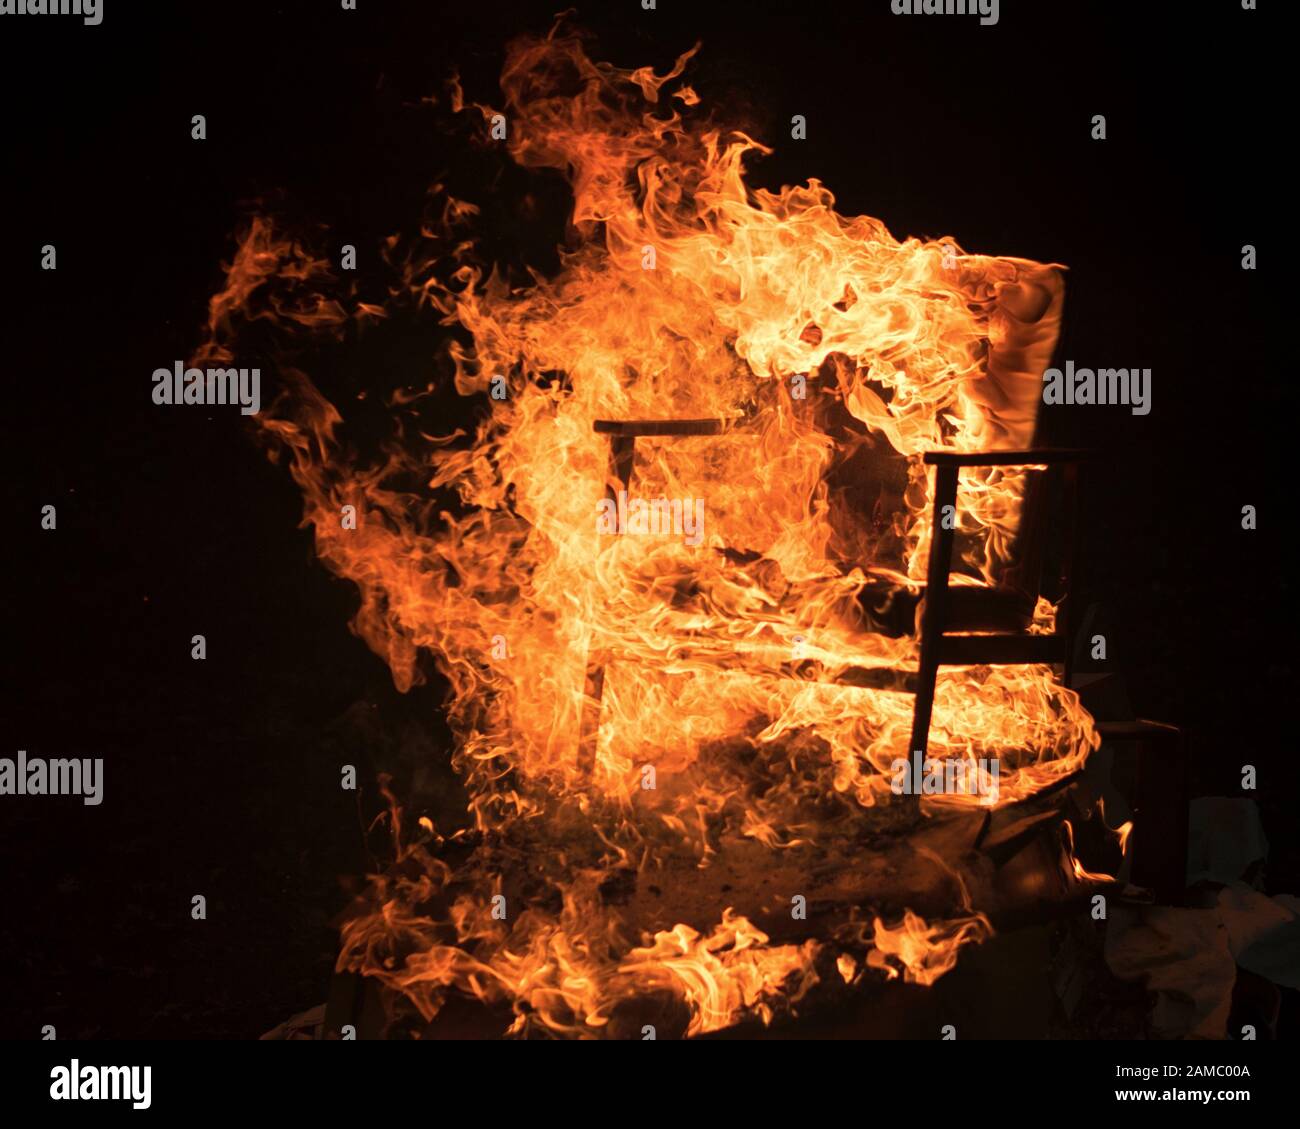 Wooden chair engulfed in flames Stock Photo